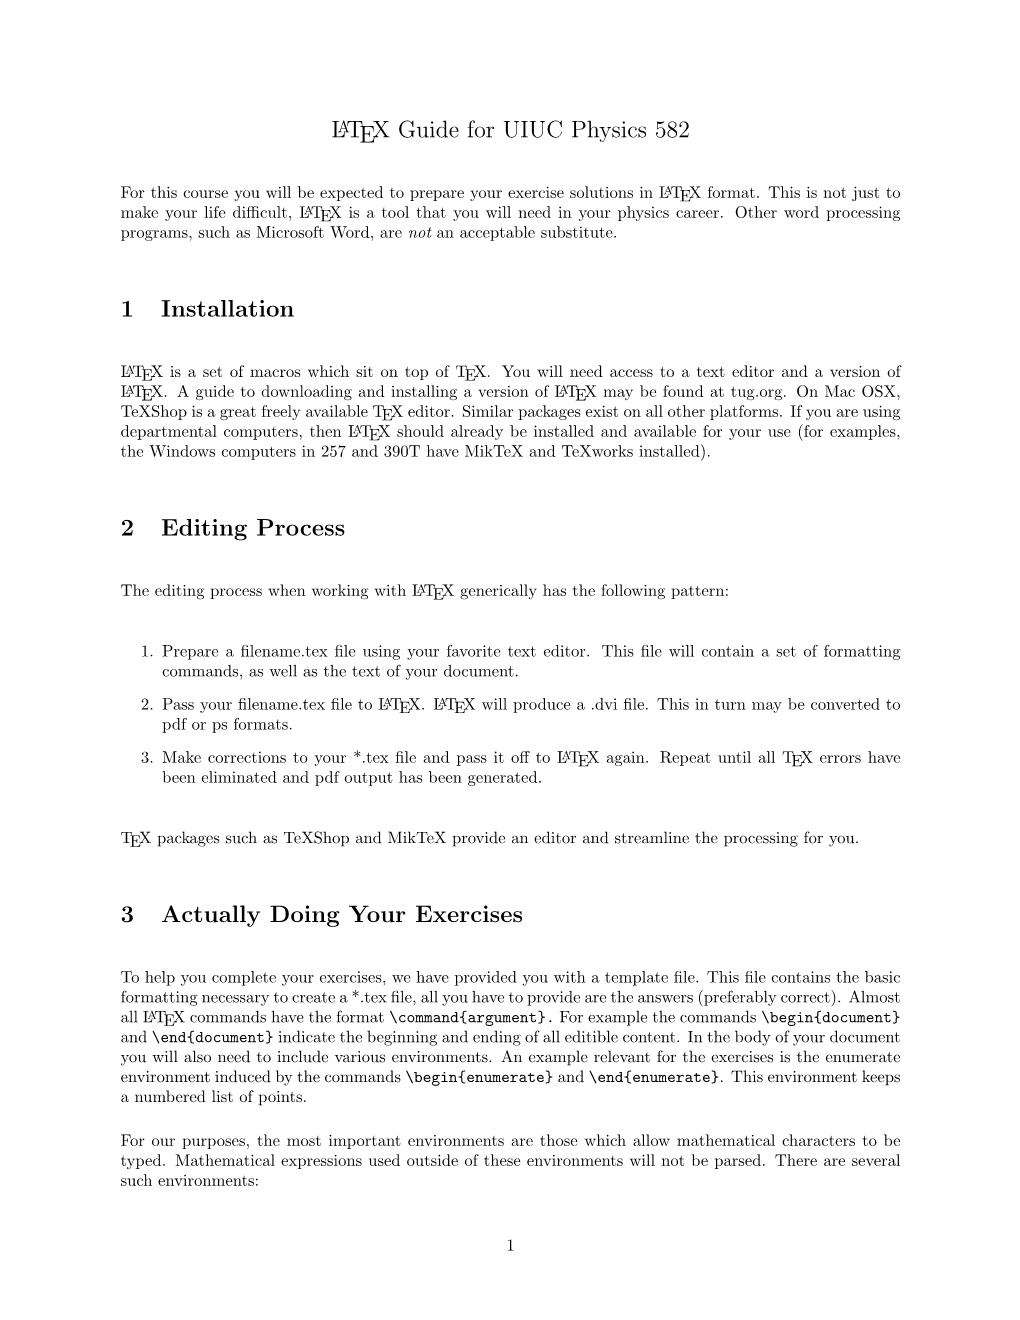 LATEX Guide for UIUC Physics 582 1 Installation 2 Editing Process 3